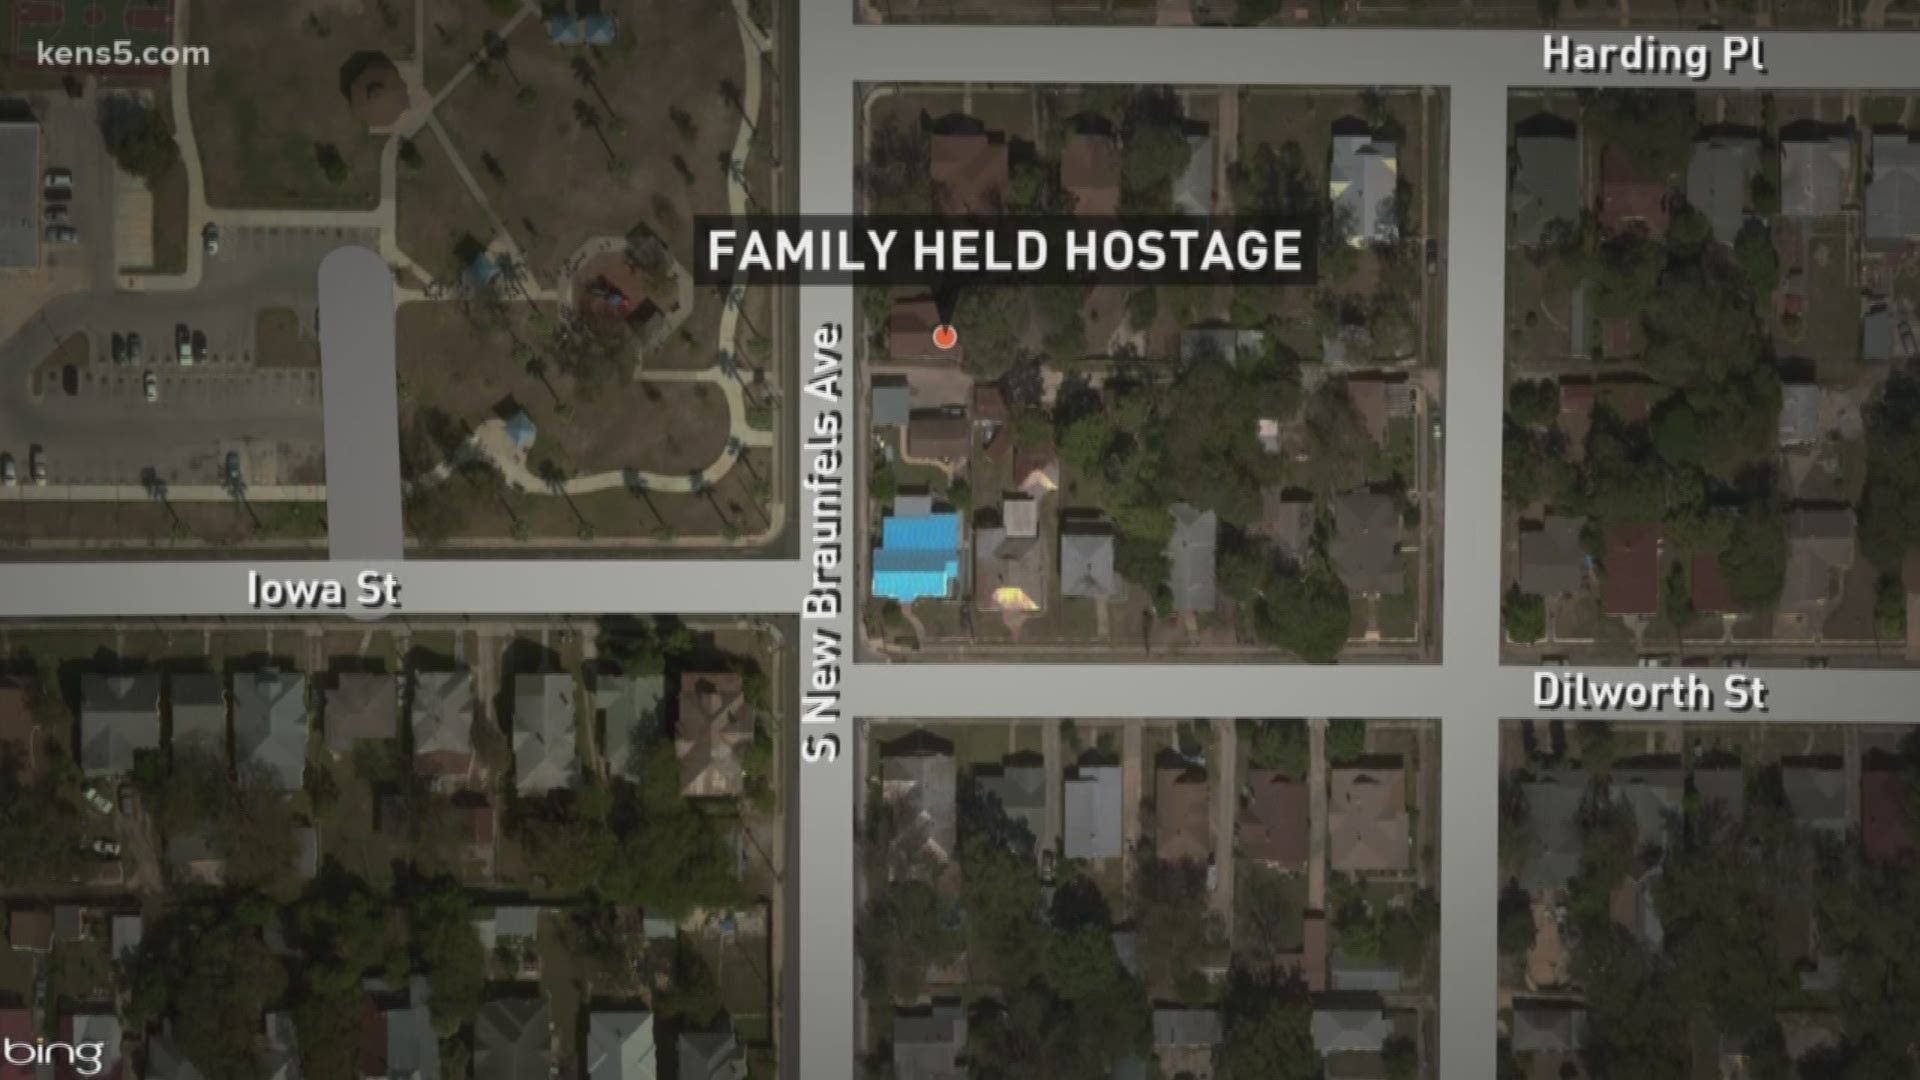 Several men held a mother and her two children hostage in their home for hours on Tuesday afternoon. We're still learning more details and the investigation is ongoing.